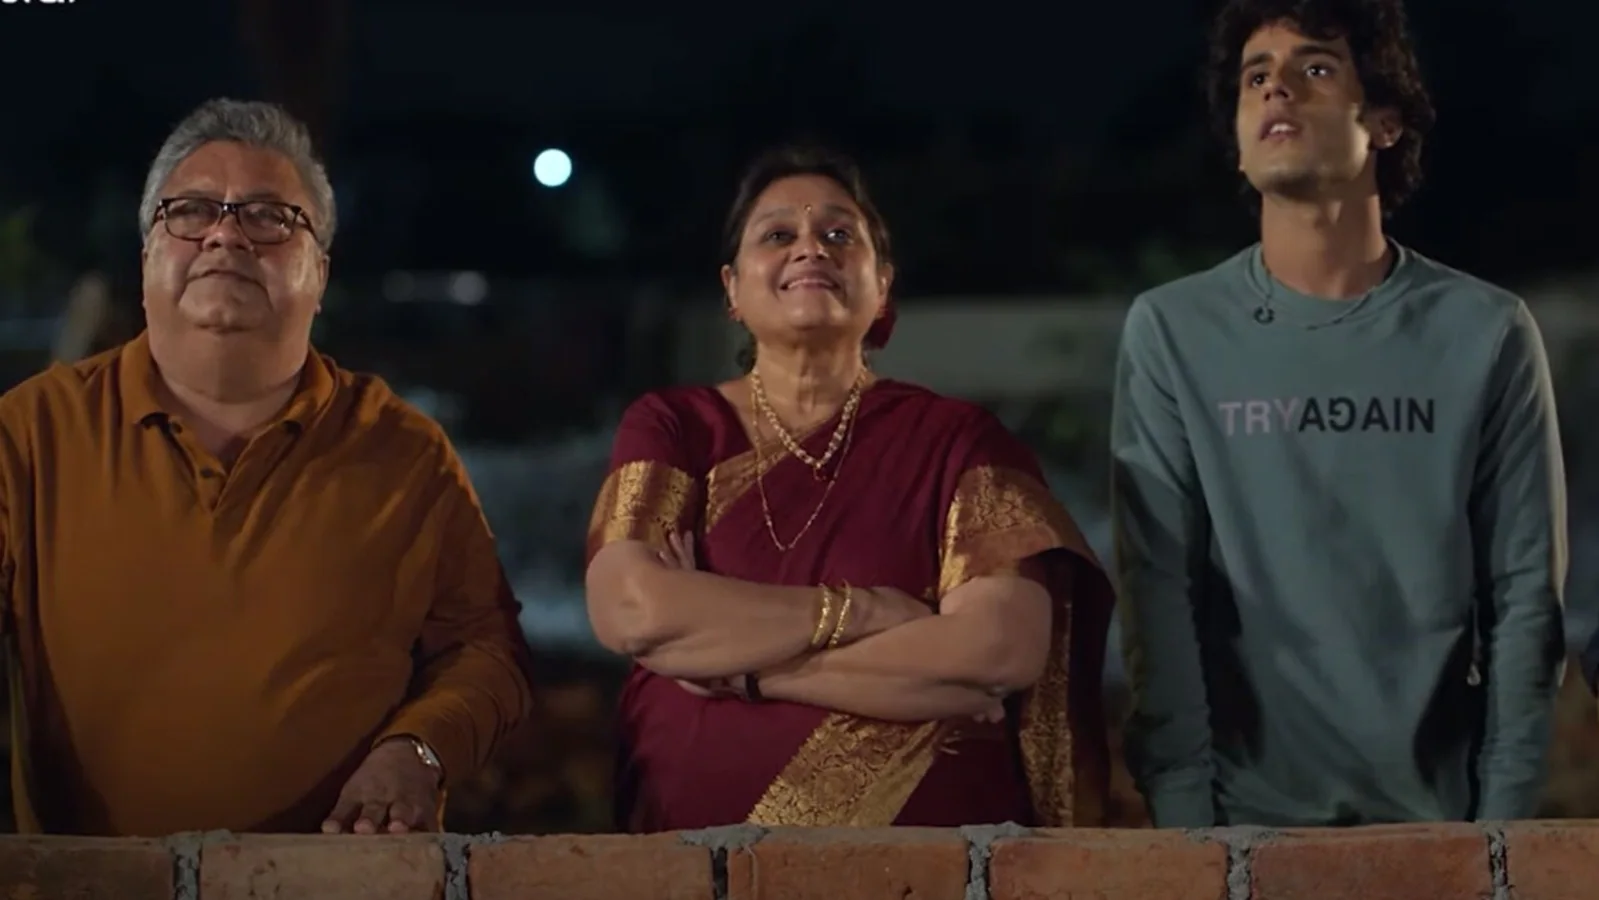 Home Shanti trailer: Supriya Pathak, Manoj Pahwa are out to fulfil their ‘mannat’ as they gear up to build a dream home